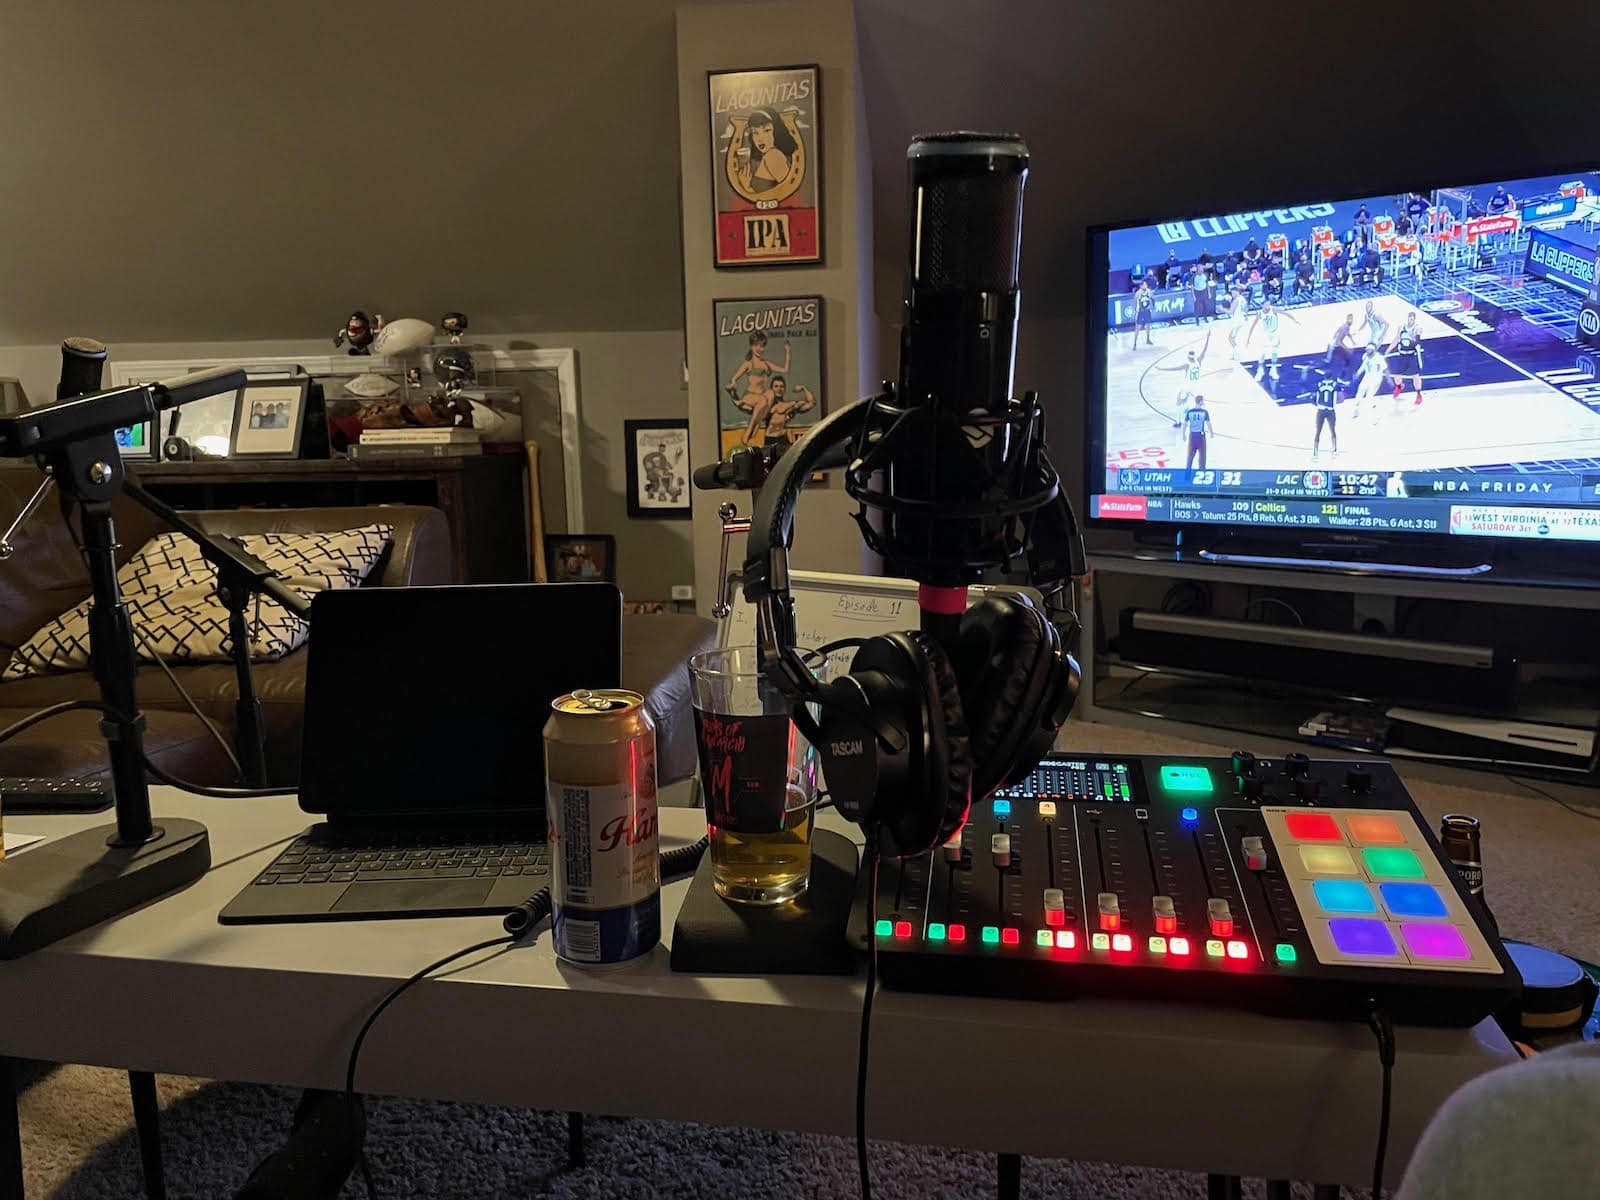 This just screams "podcasting," right? Laptop. Console. Microphone. Headphones. Beer.